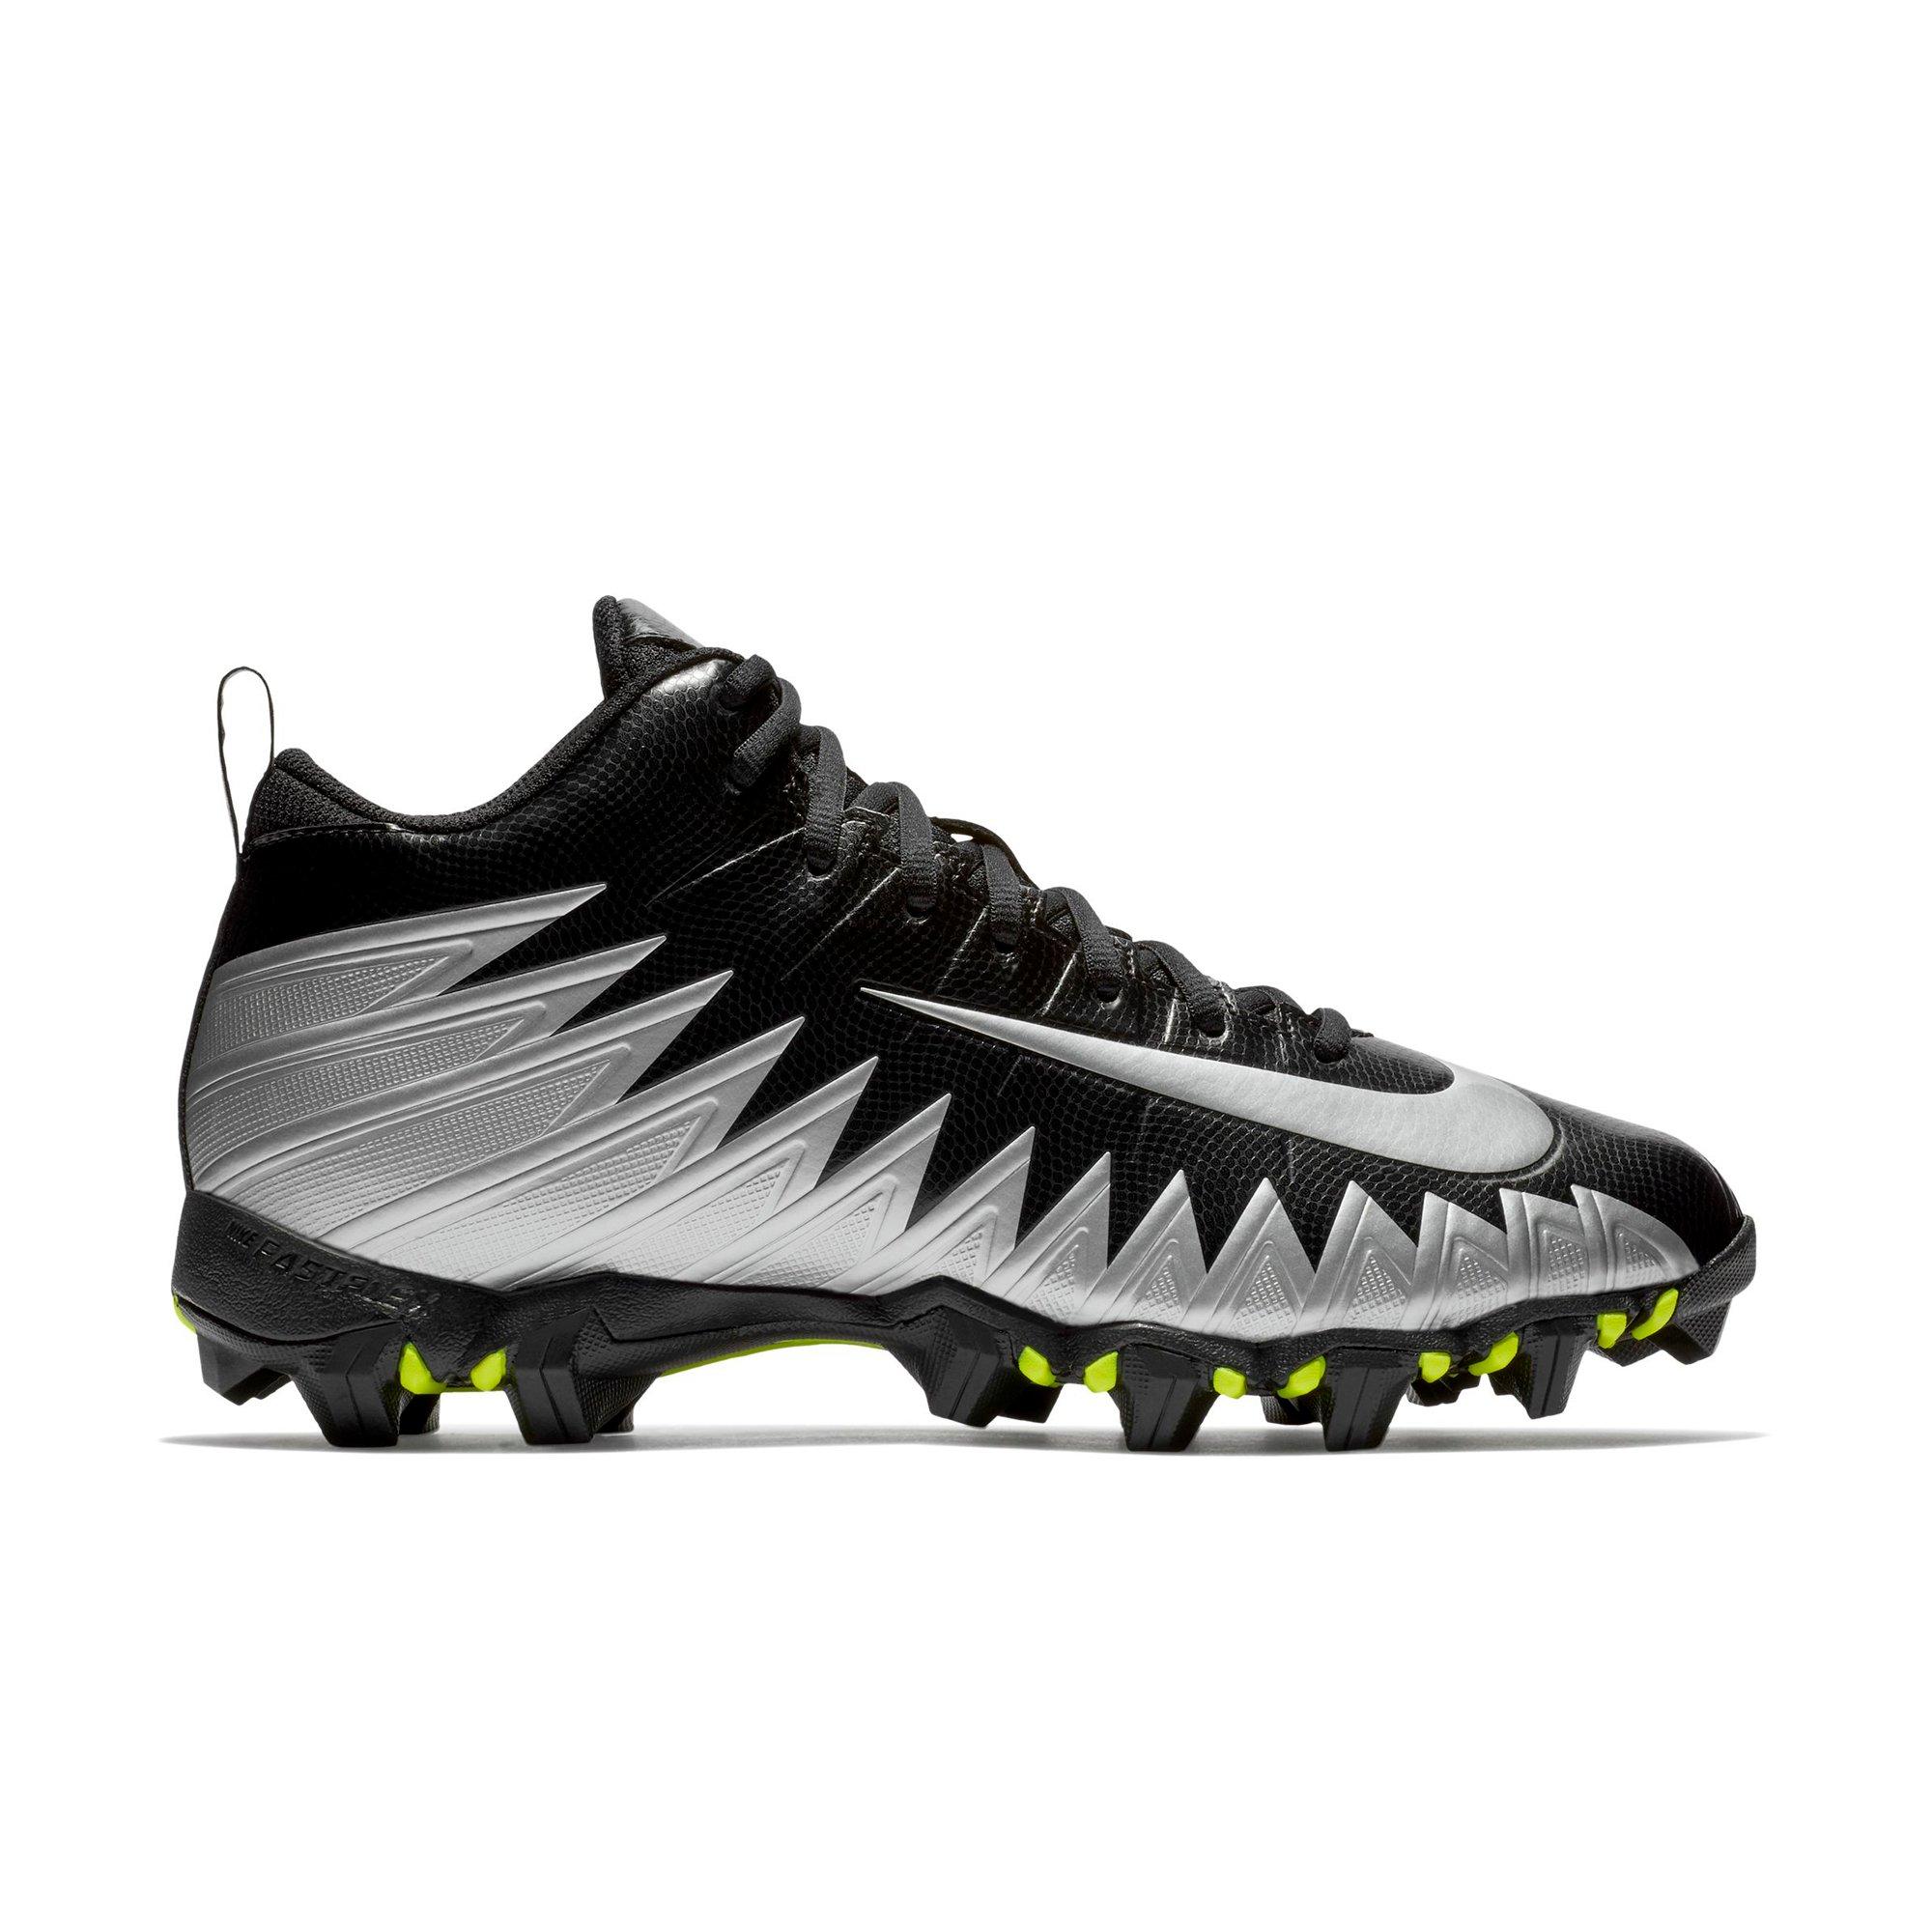 size 13 wide football cleats